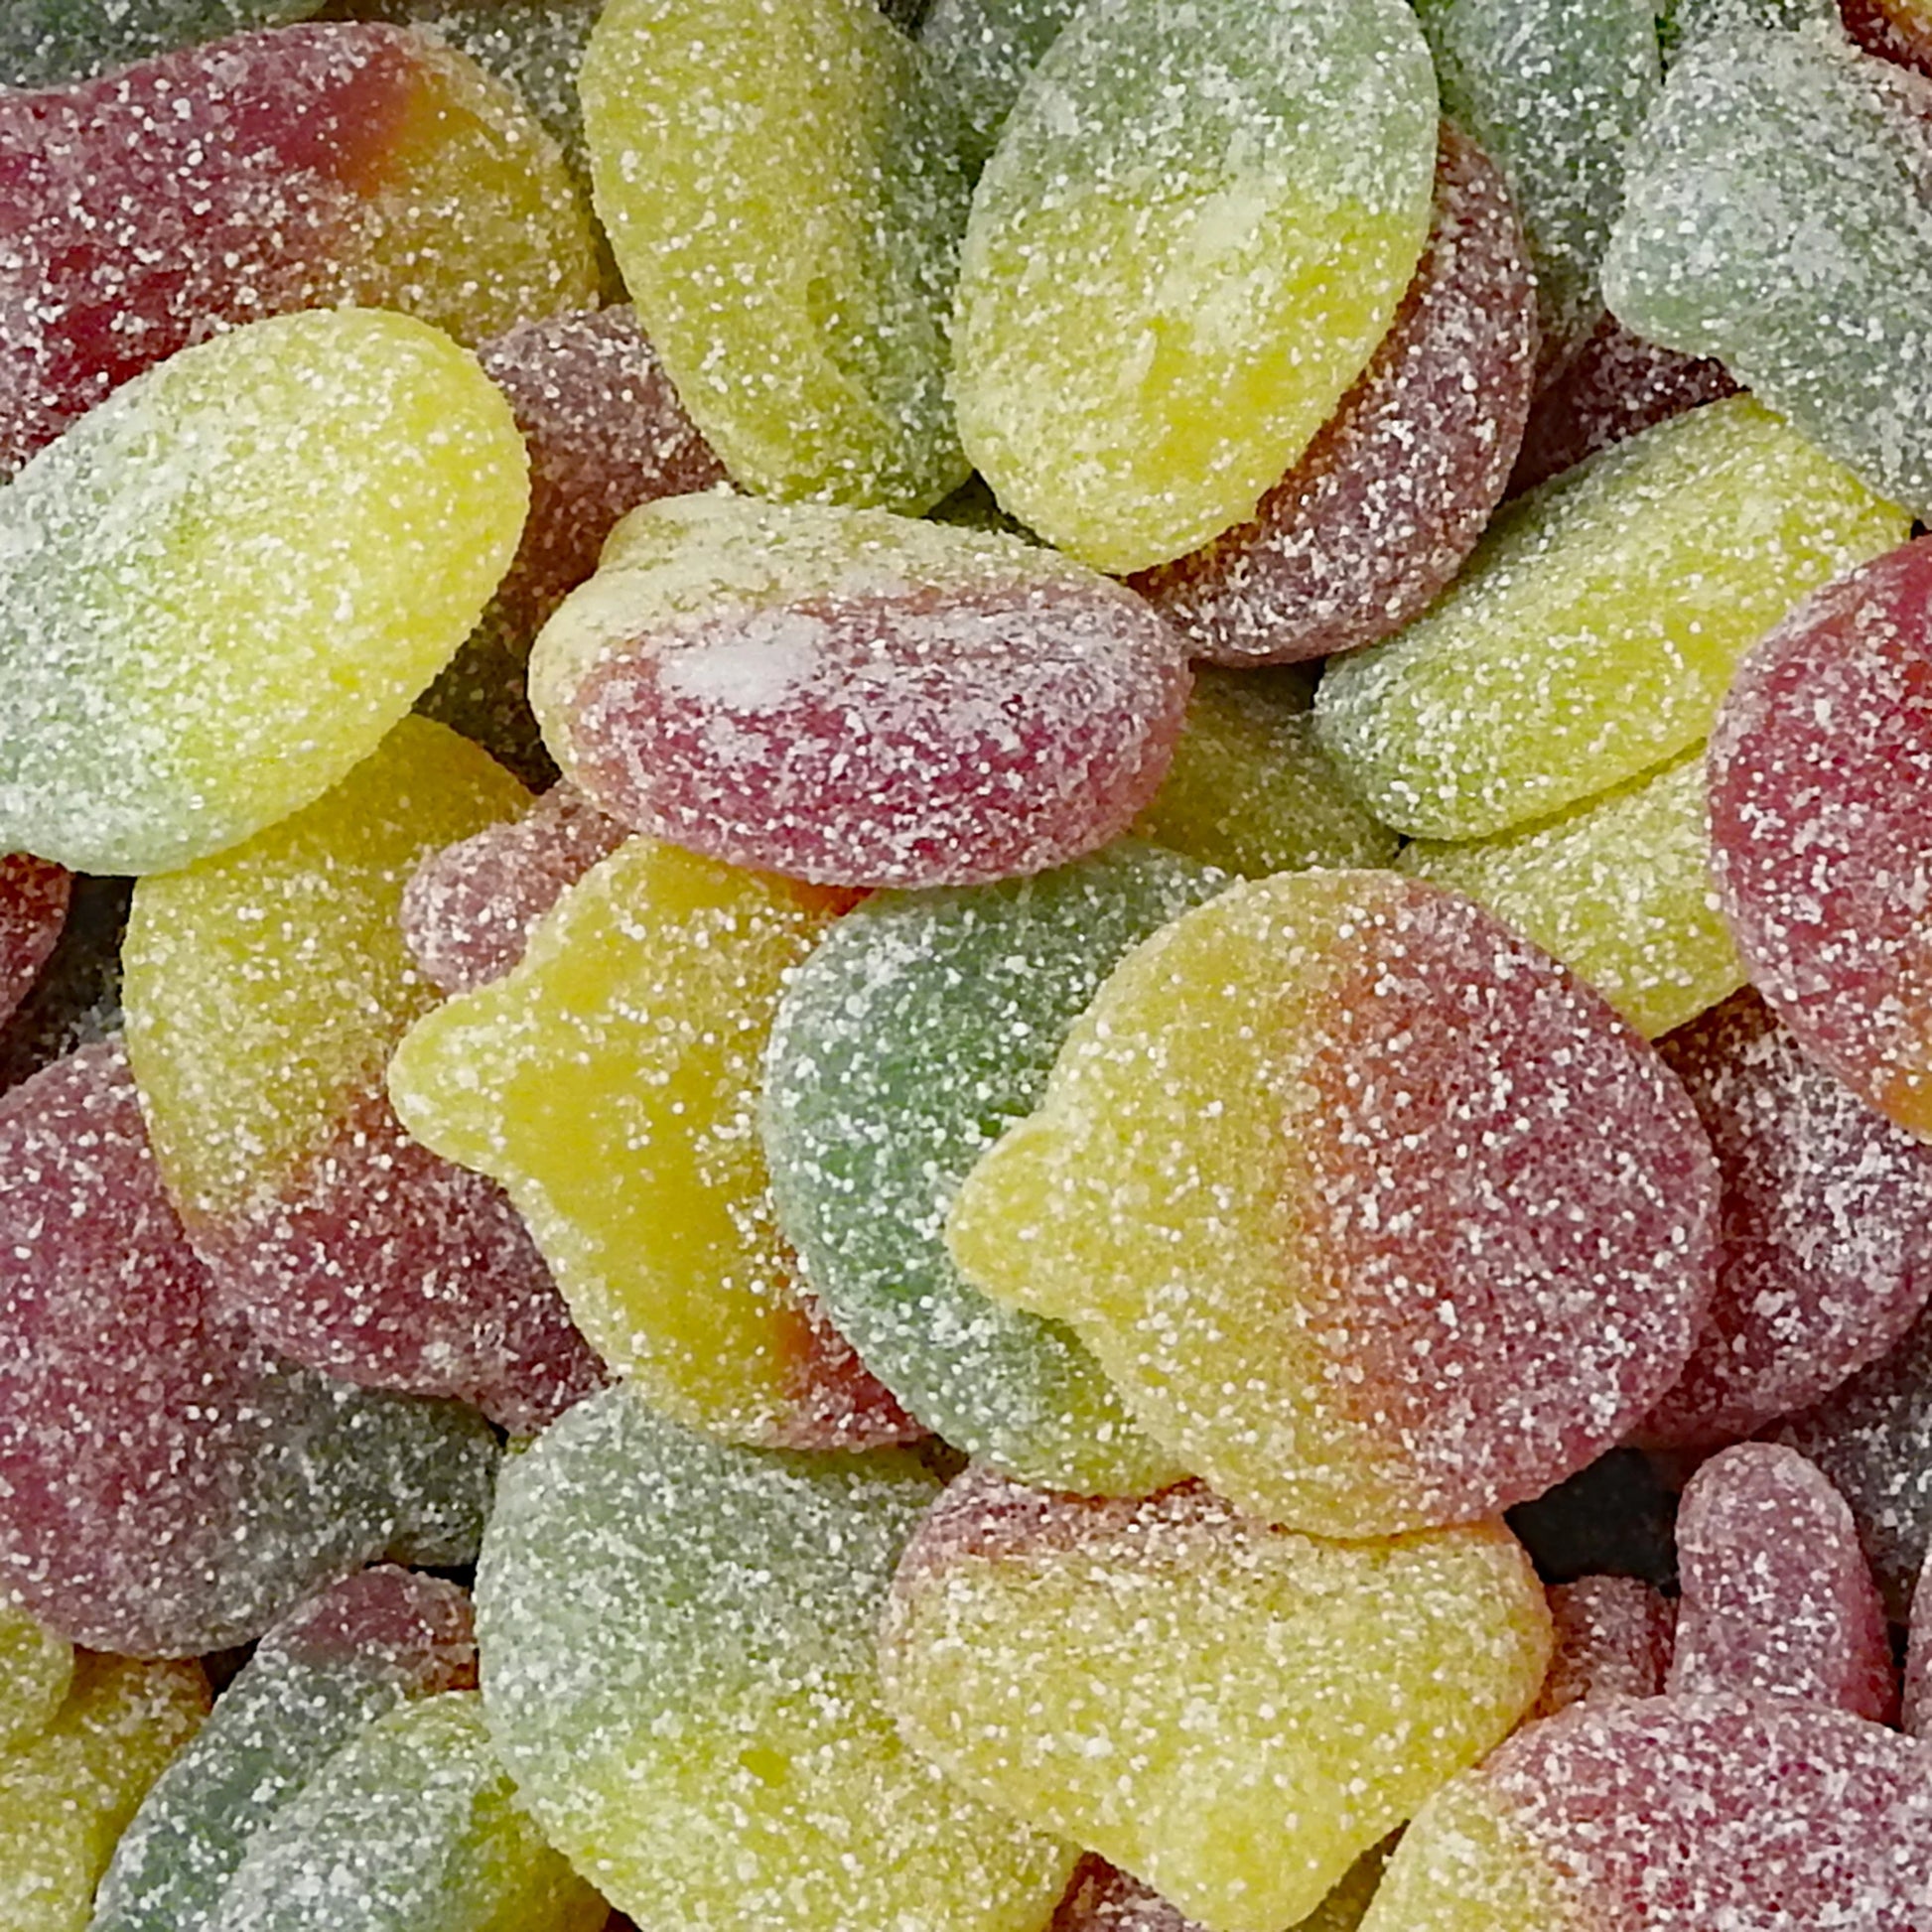 Sour Apples - Retro Sweets at The Sweetie Jar